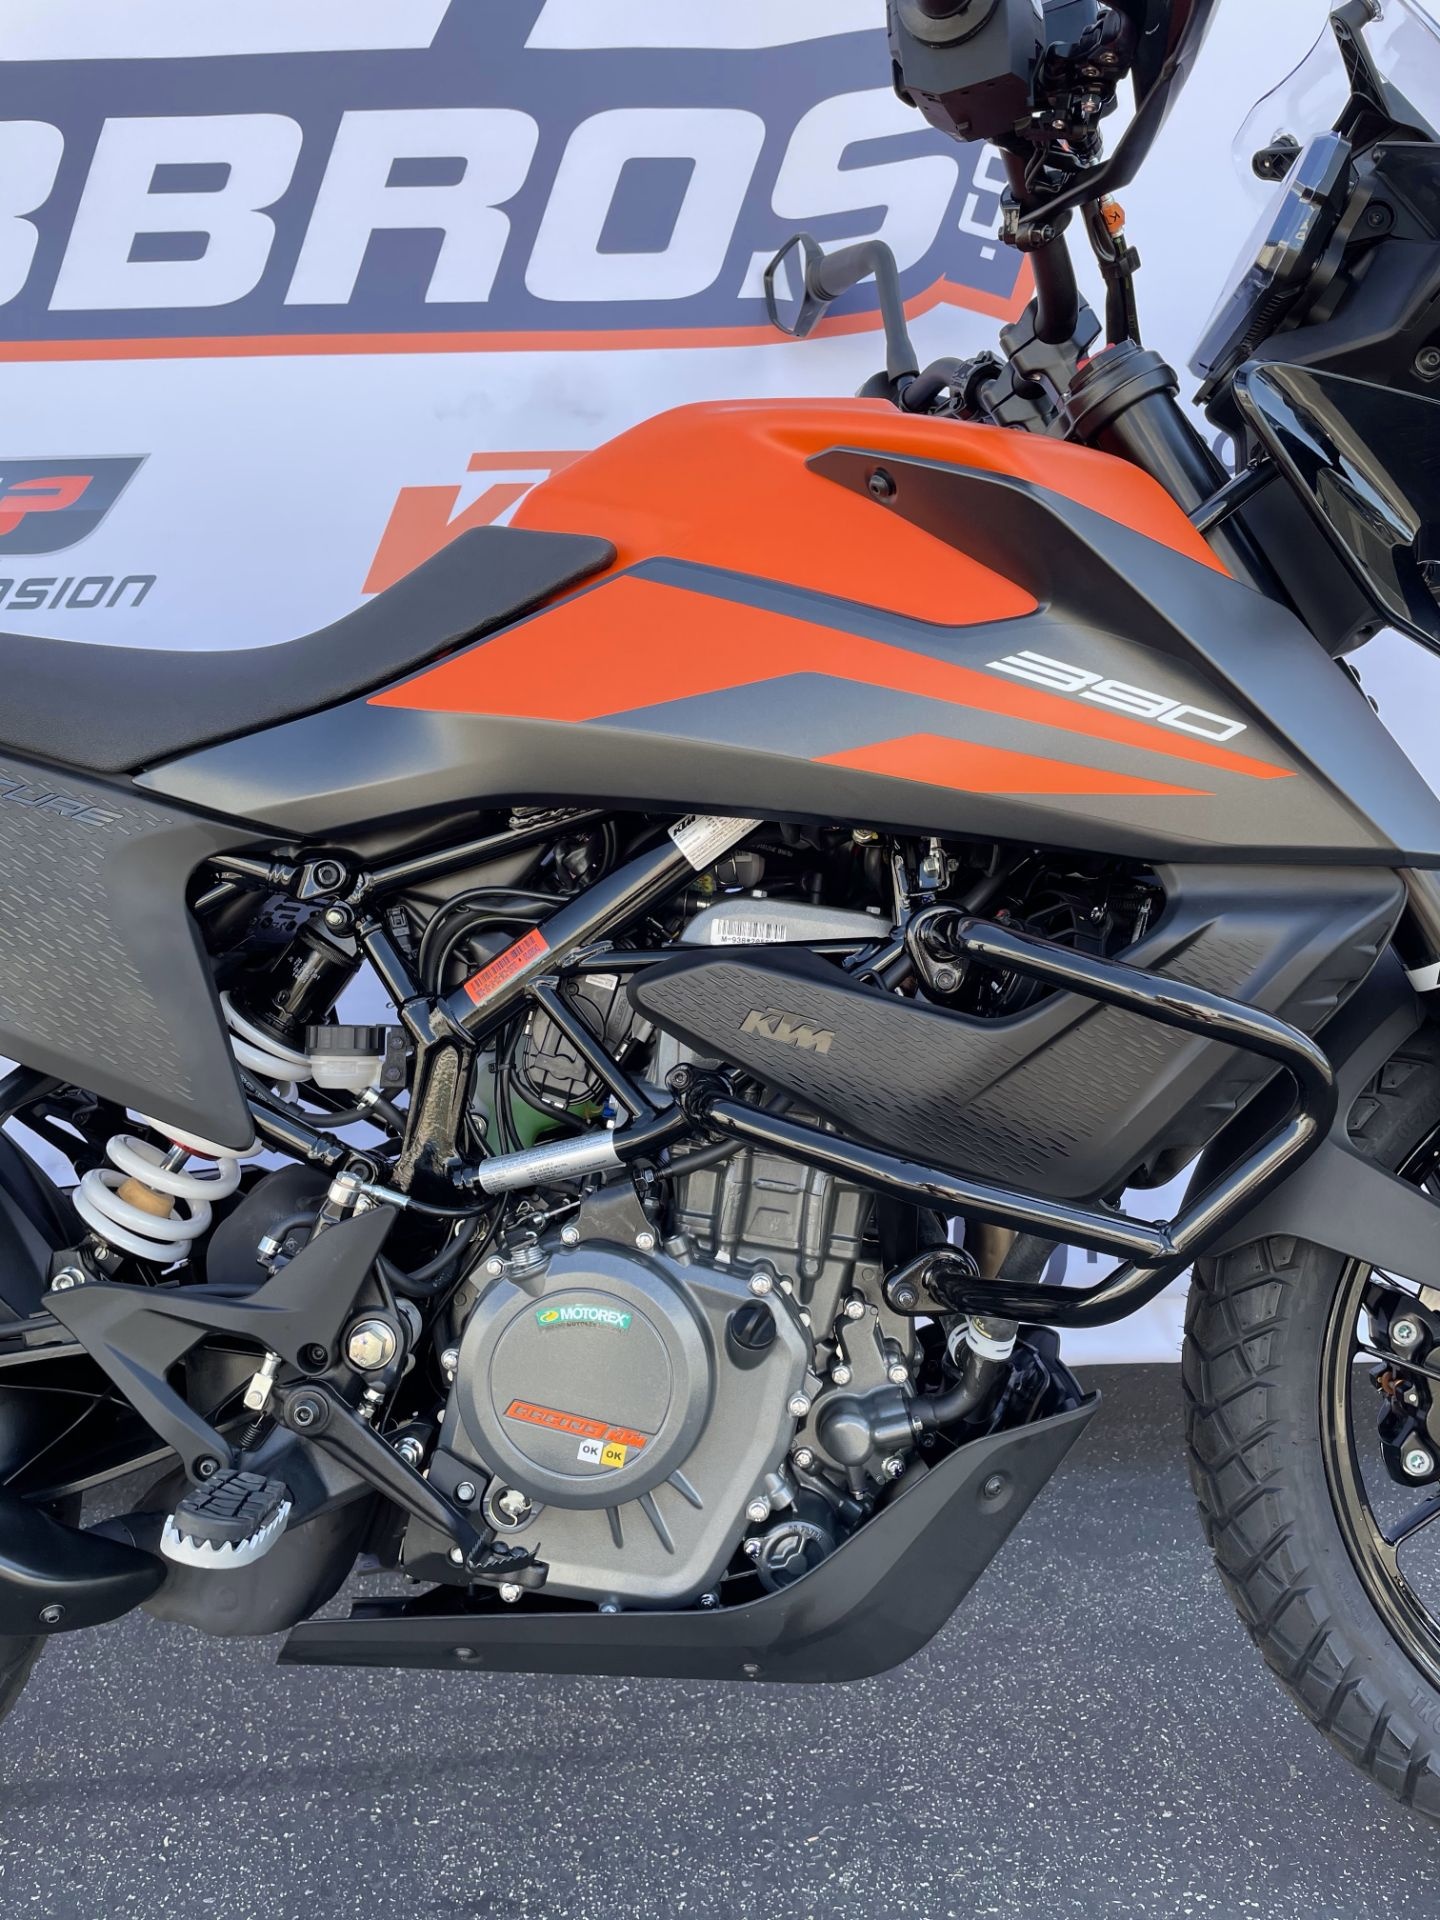 KTM 390 Adventure, Orange motorcycles, Costa Mesa CA, Out of stock, 1440x1920 HD Phone